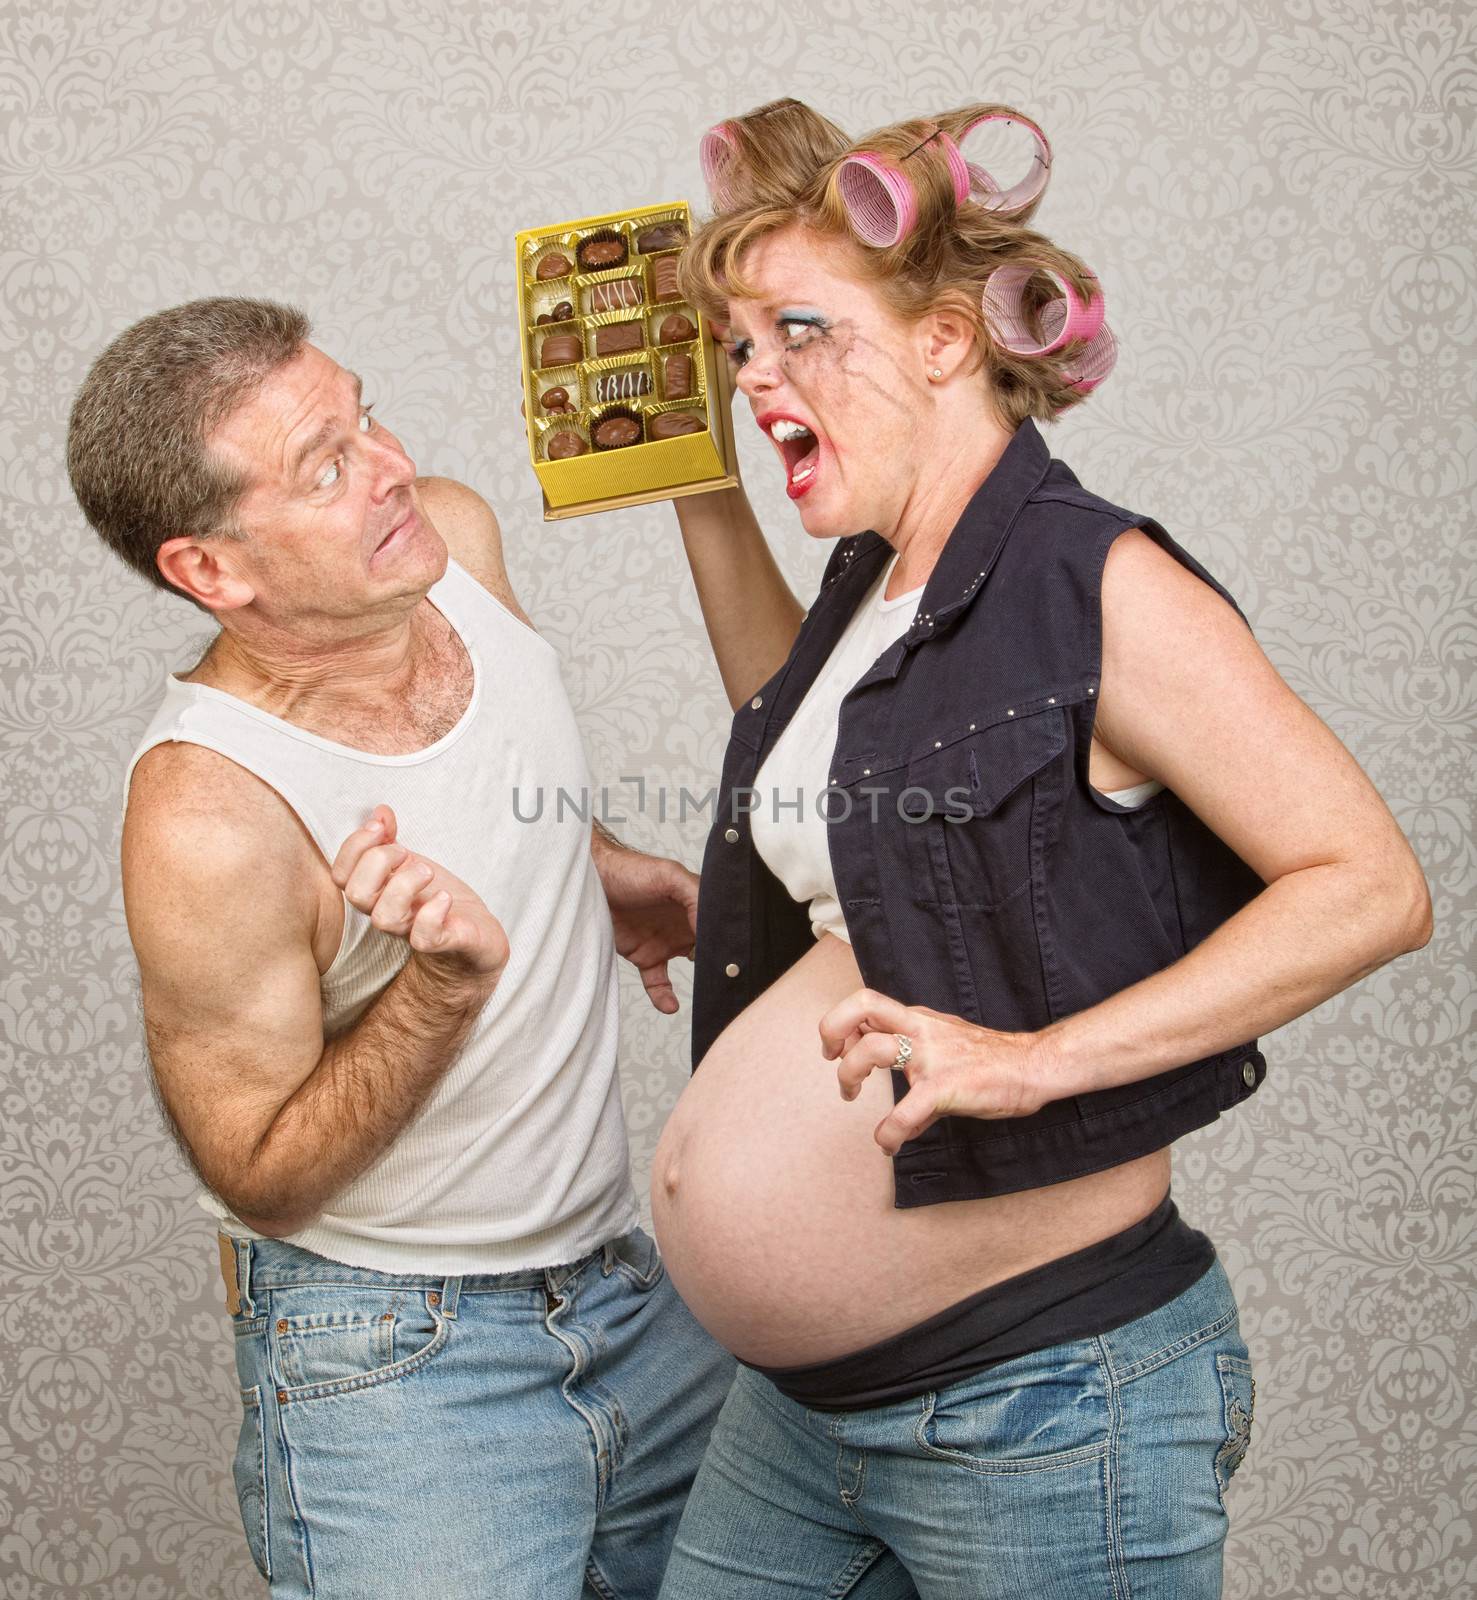 Angry pregnant hillbilly woman yelling at man with chocolate